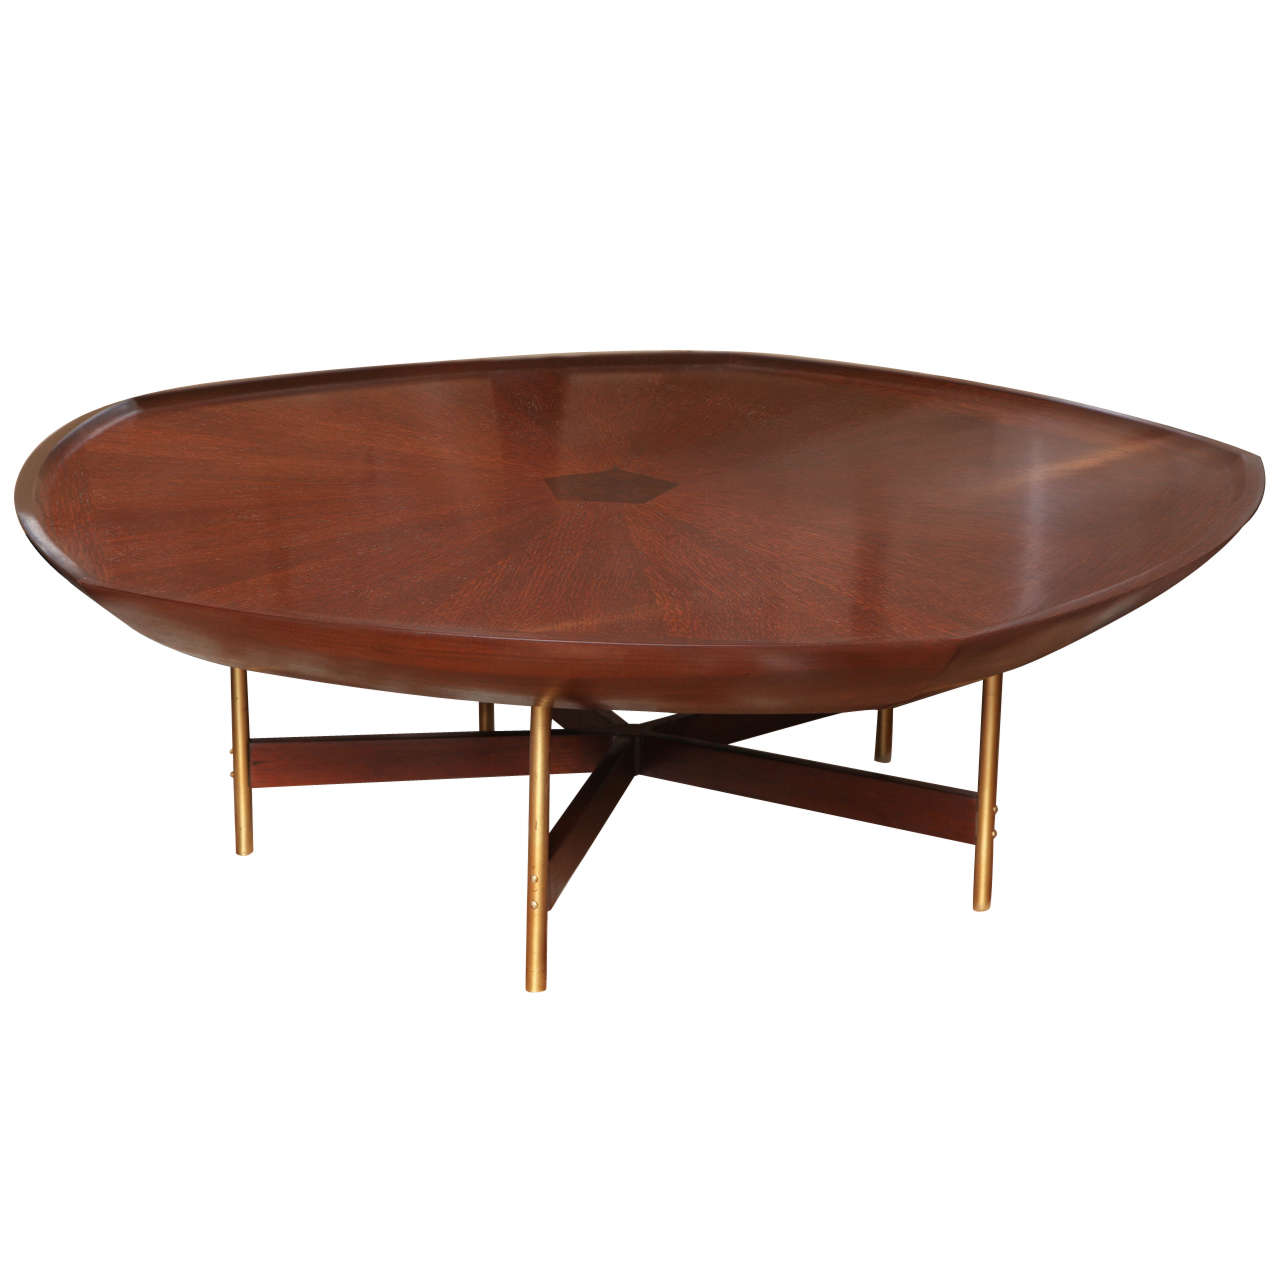 Pentagon Shaped Cocktail Table By Paul Tuttle and Winsor White for Baker c.1960